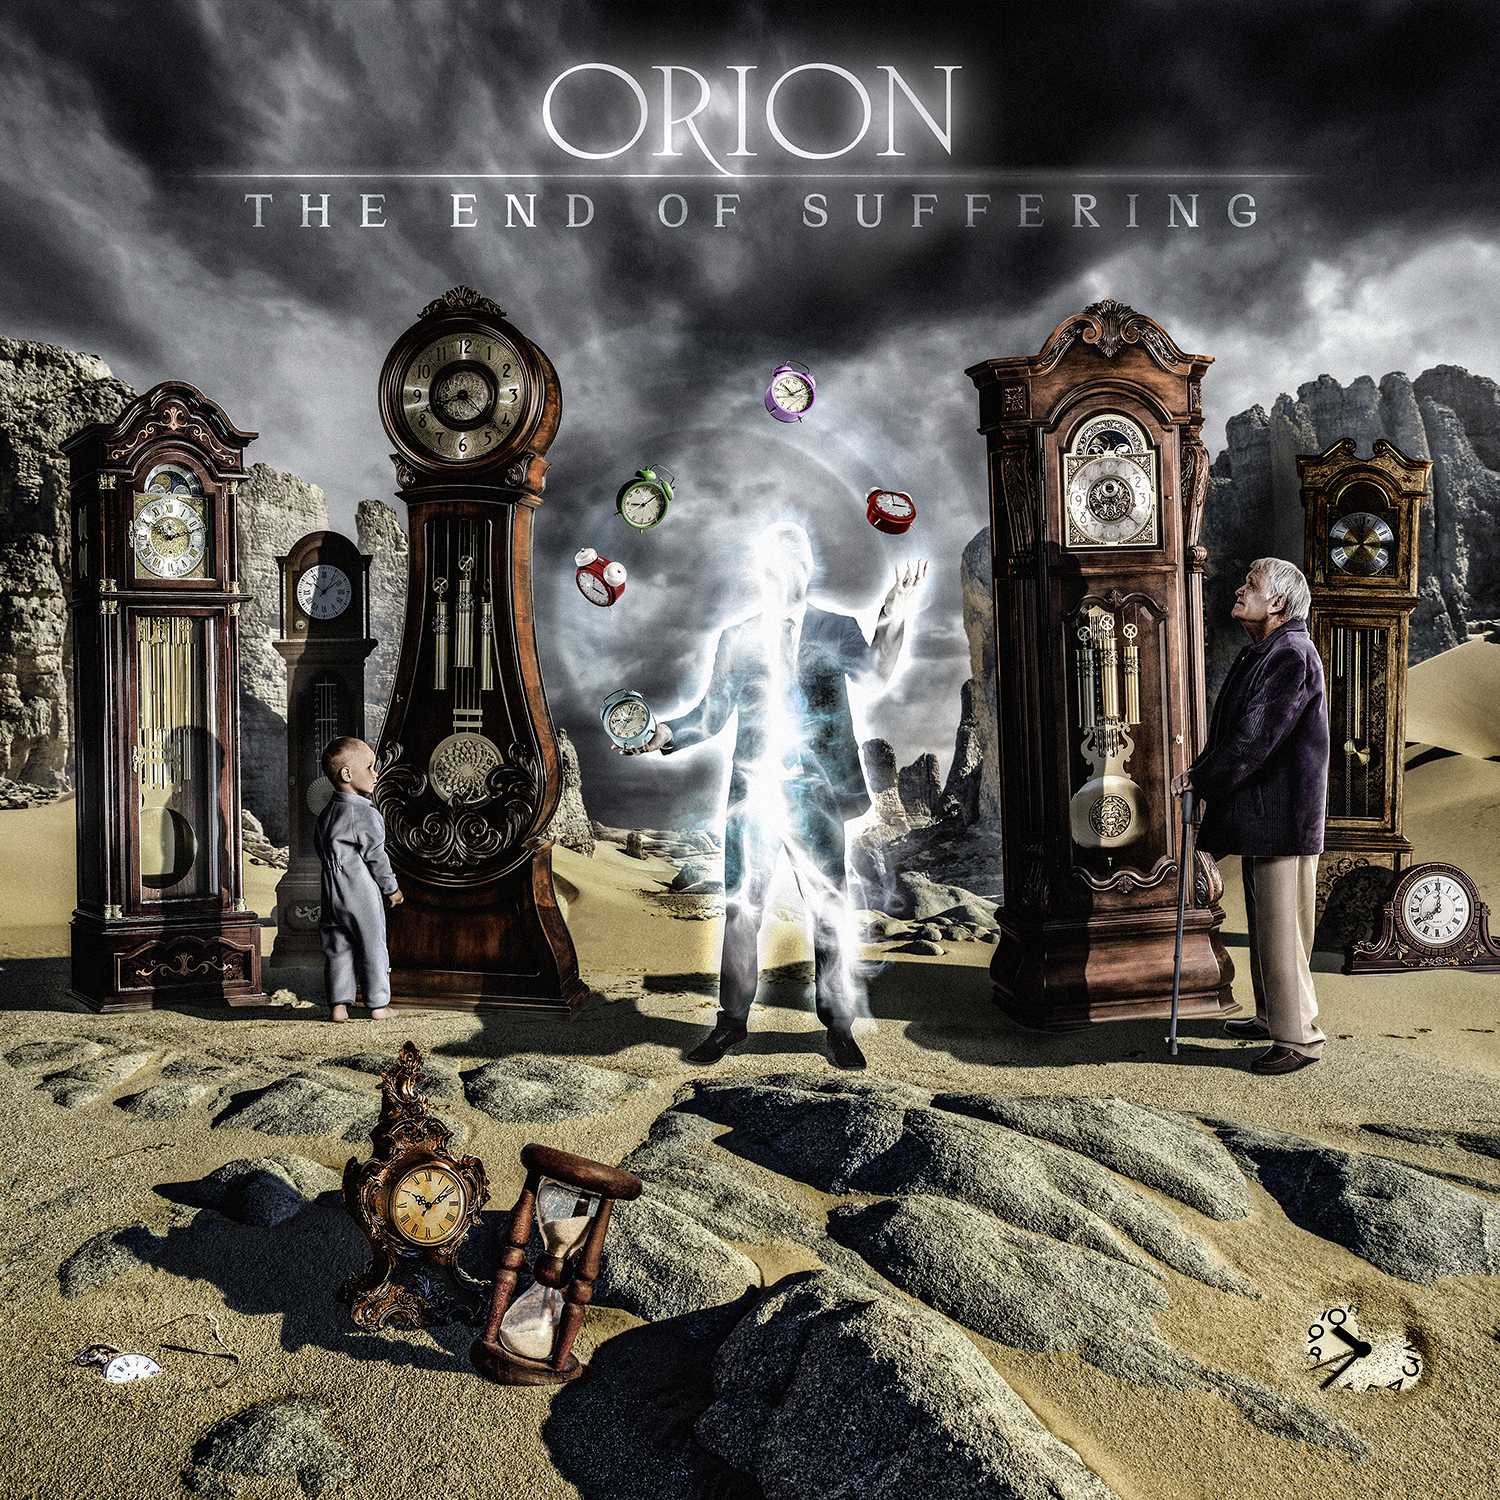 Orion – "The End of Suffering" album cover